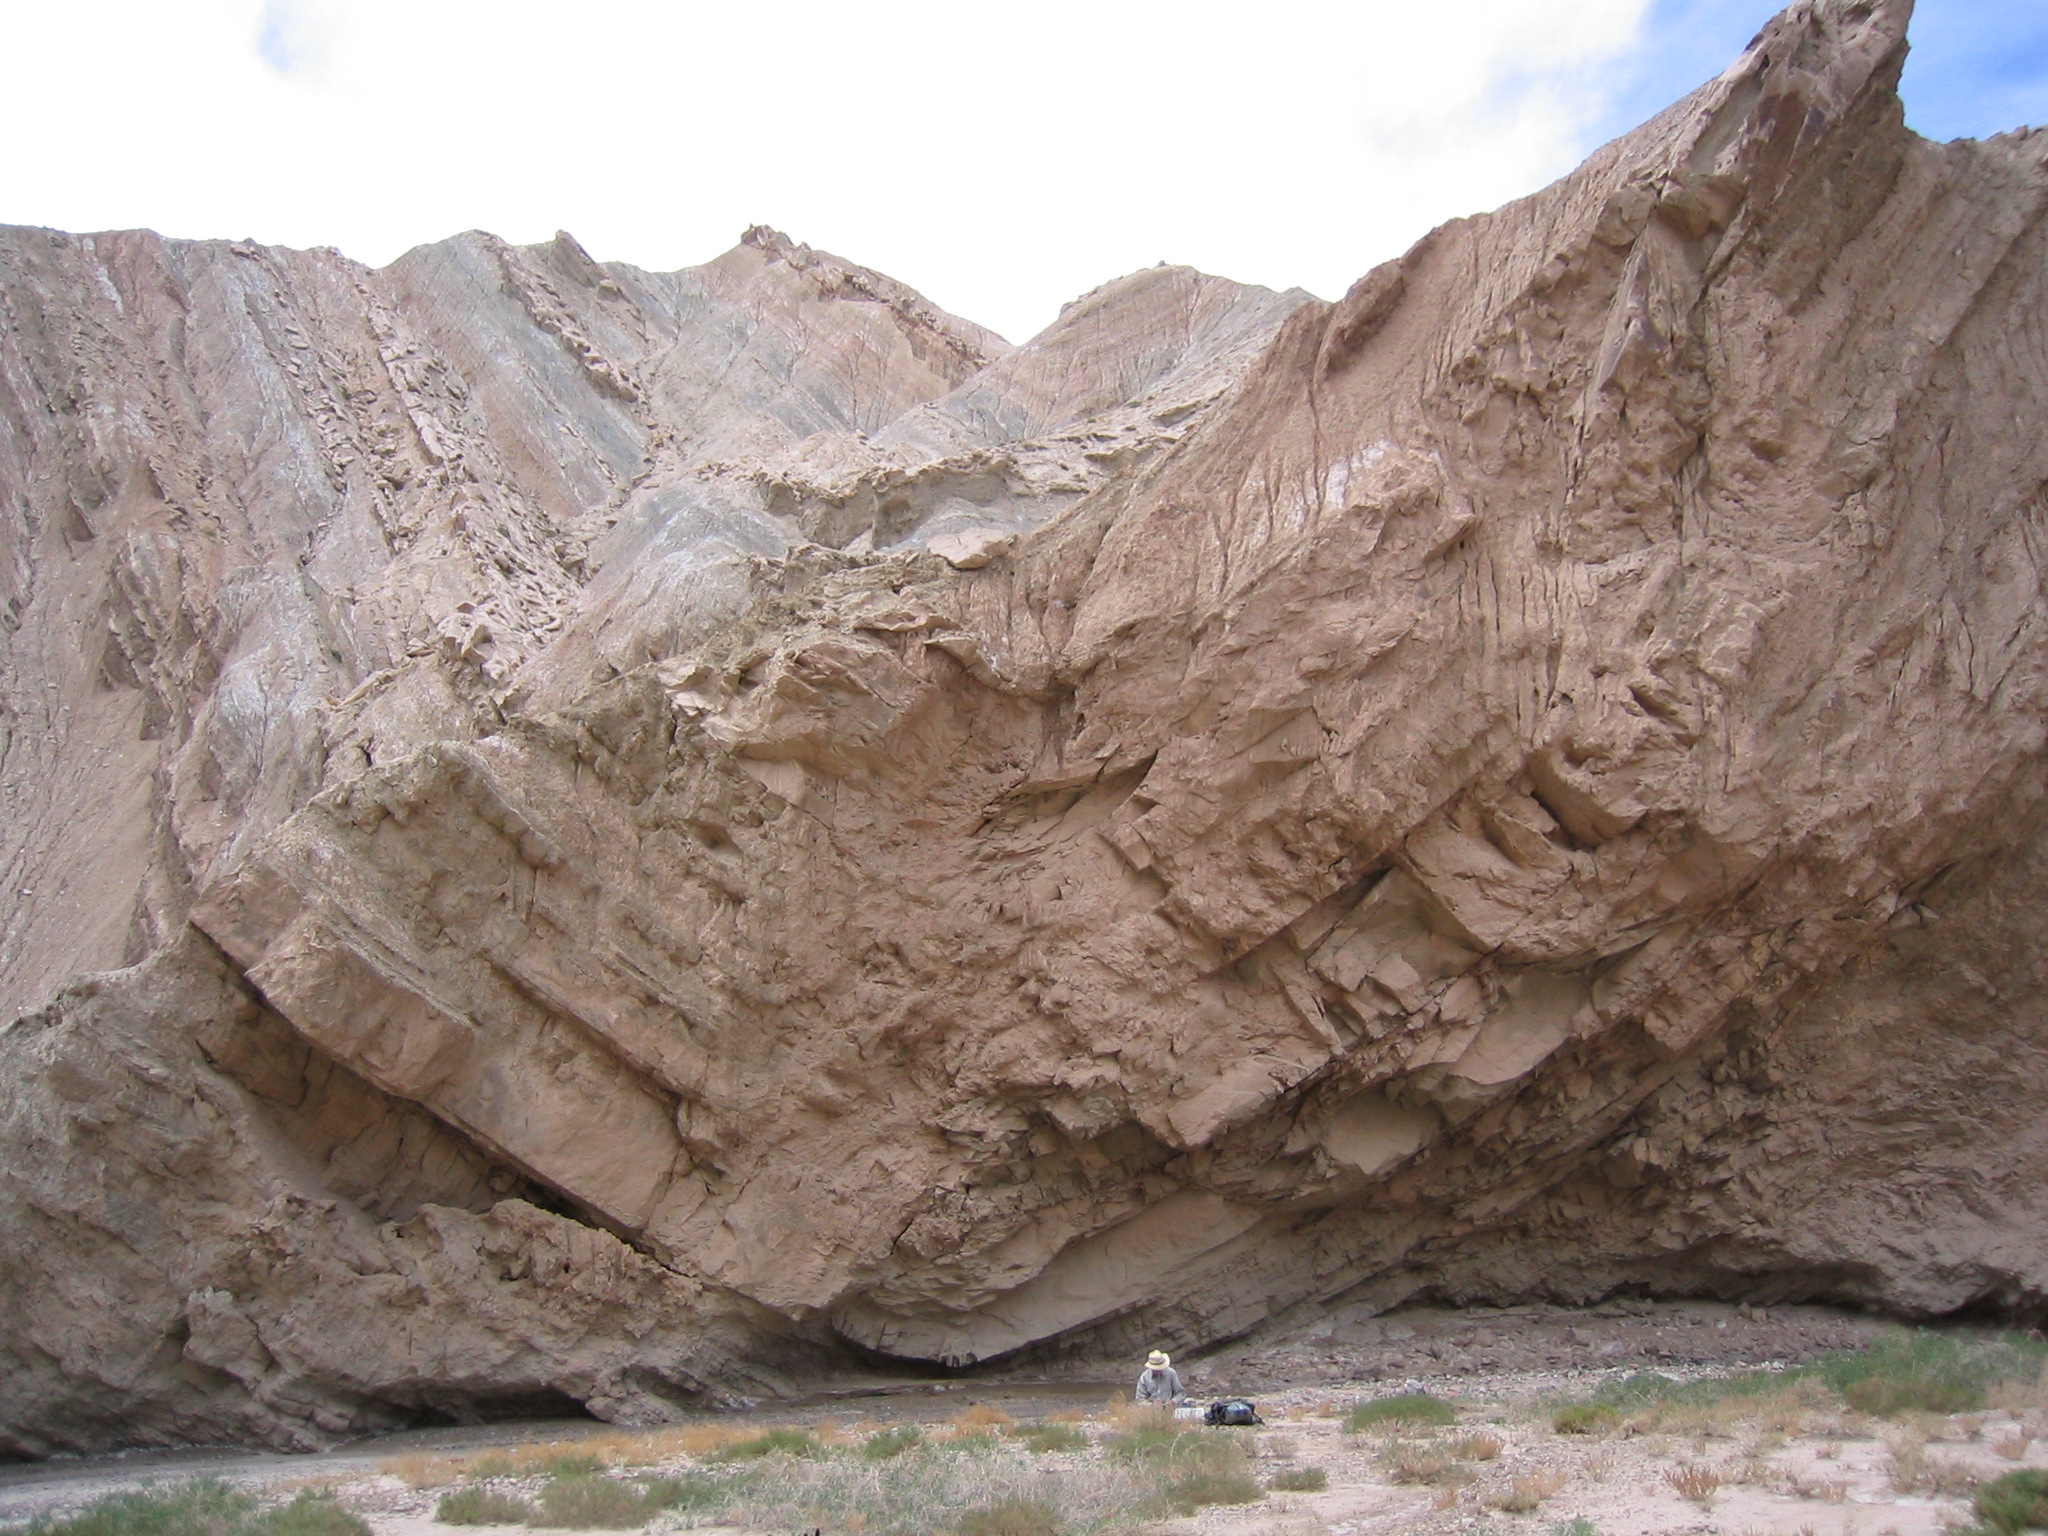 Core of a syncline (concave up fold) in Miocene (24-5 million years) sandstone and shale from the western Tarim Basin, China.